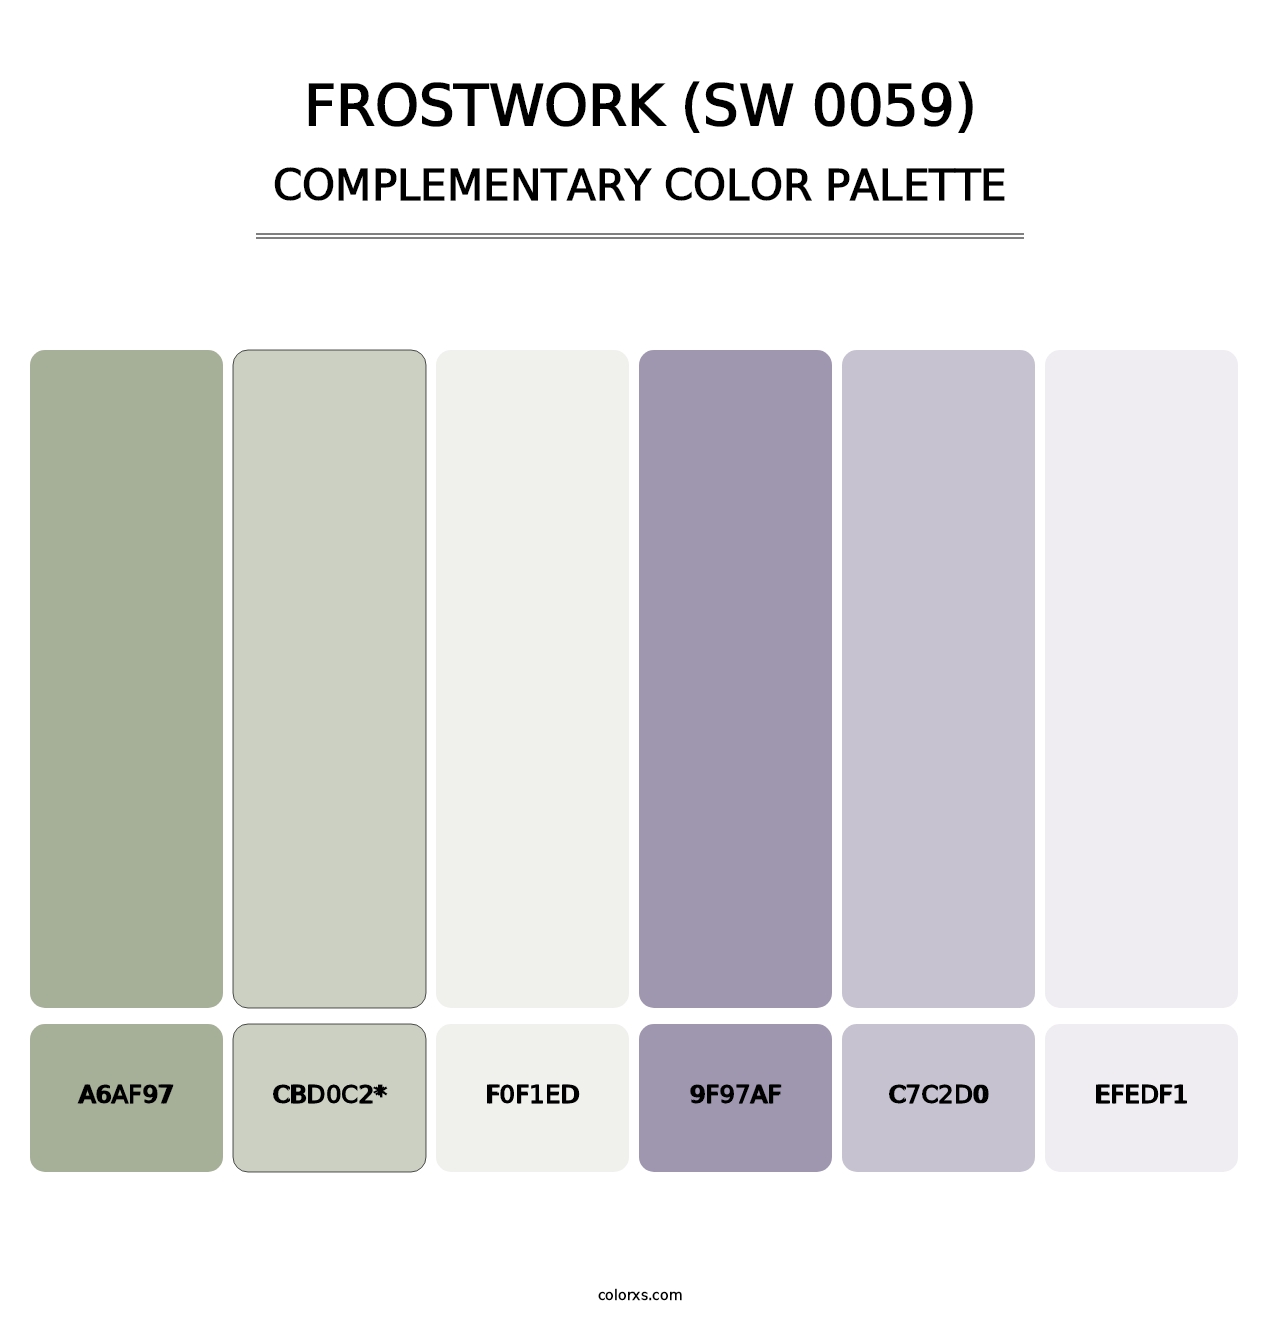 Frostwork (SW 0059) - Complementary Color Palette